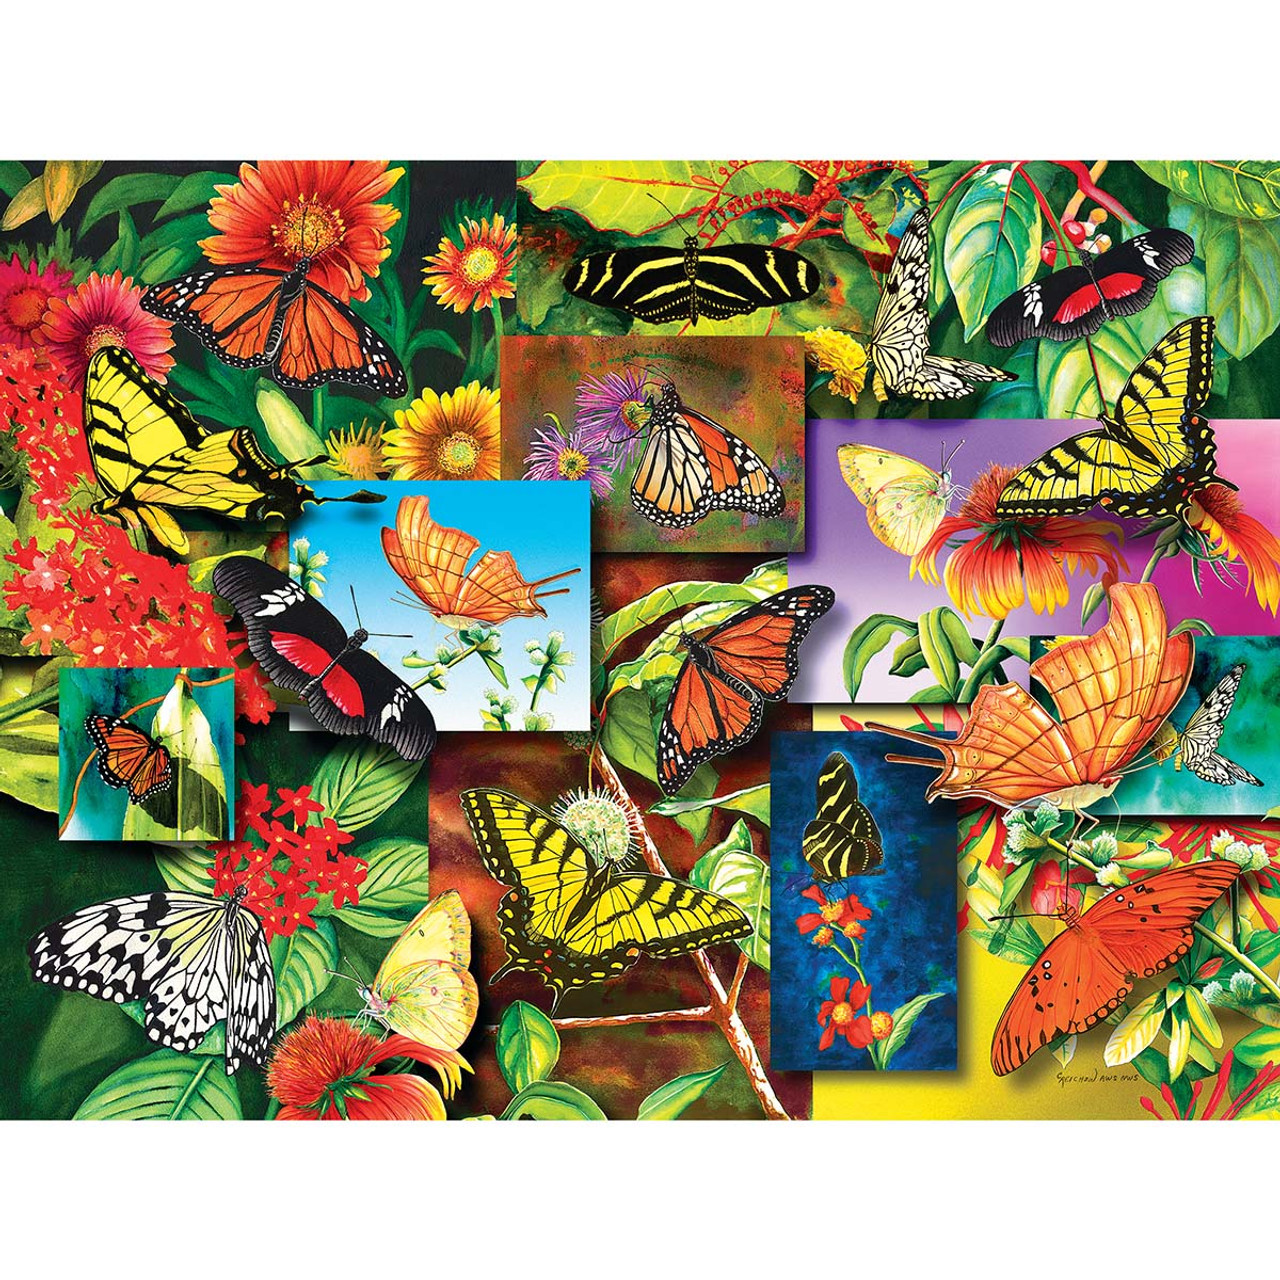 Patches of Fun 1000-Piece Puzzle – Willow Creek Press